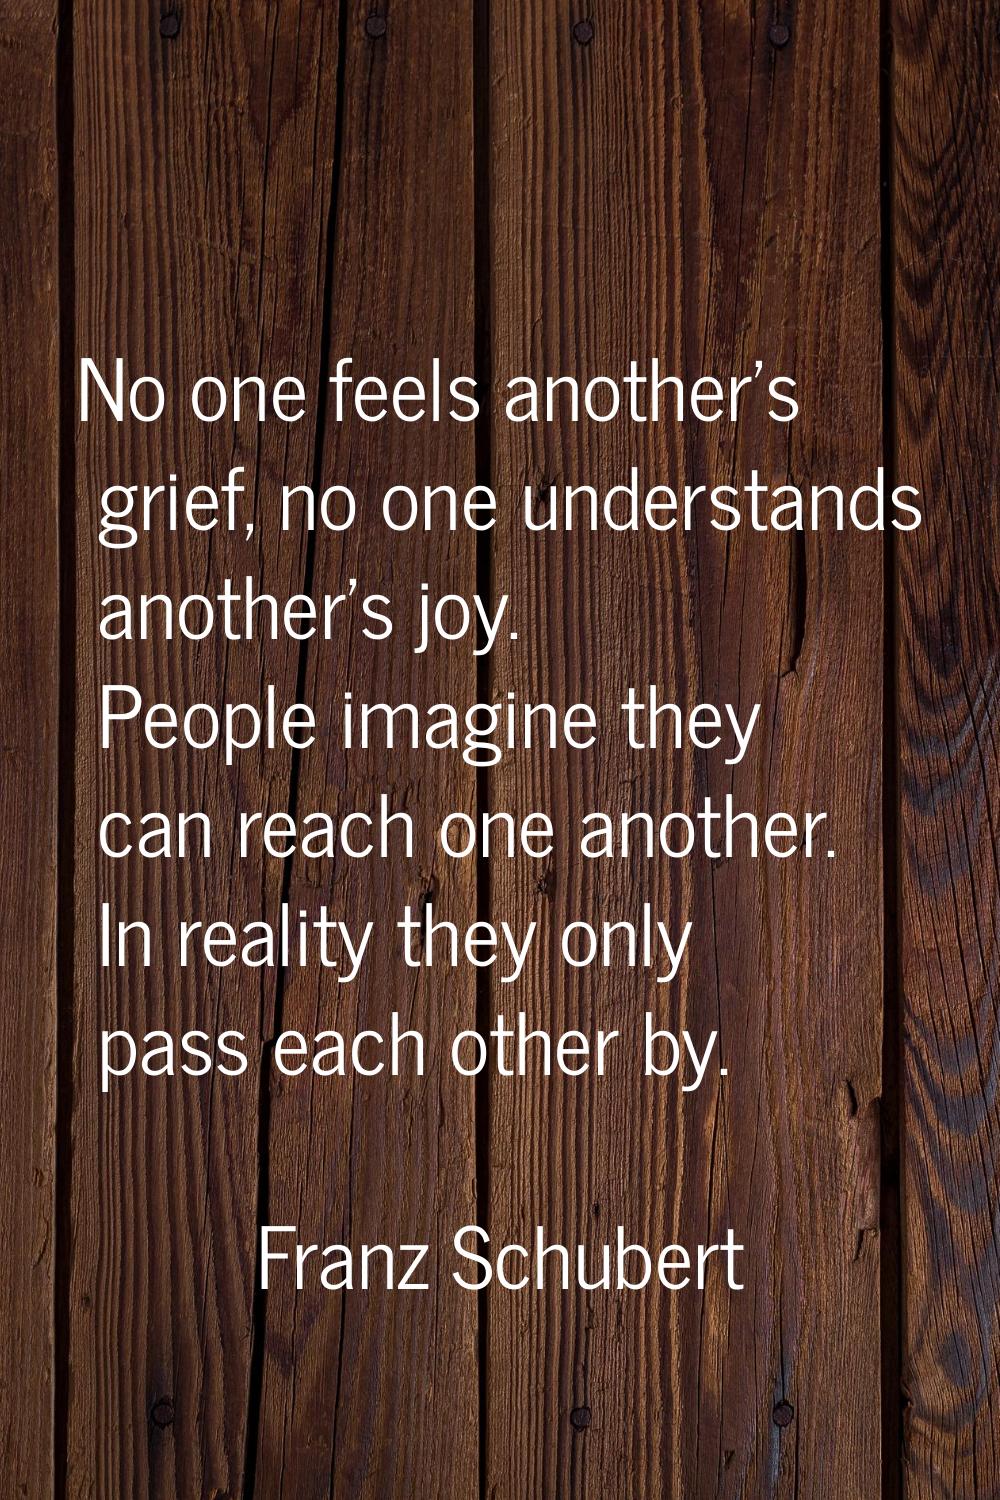 No one feels another's grief, no one understands another's joy. People imagine they can reach one a